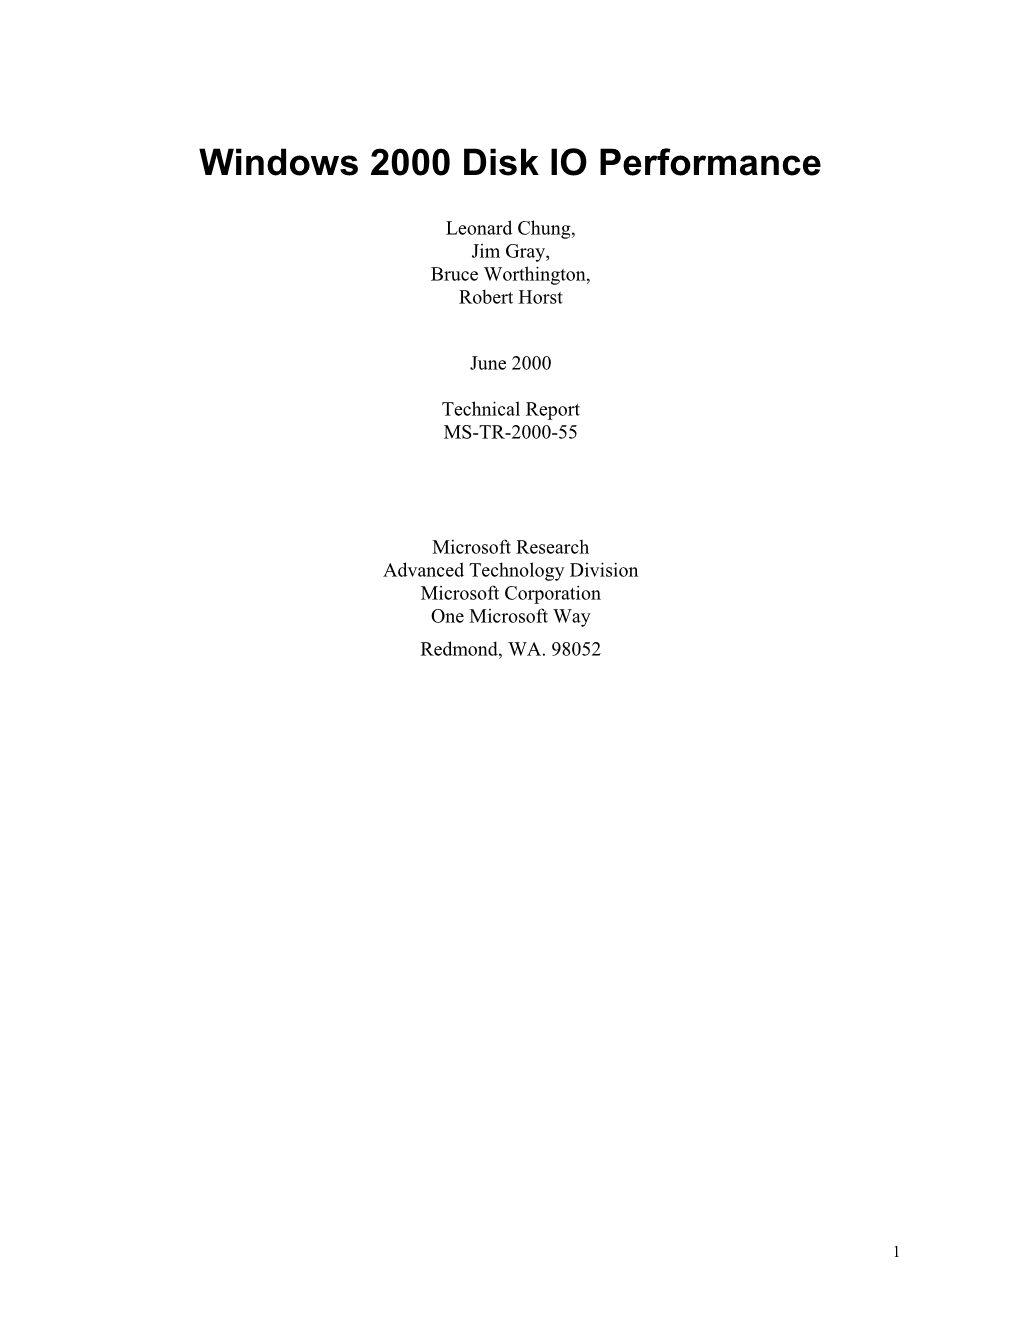 Differences and Similarities Between NT4 and Win2k Single Disk Performance